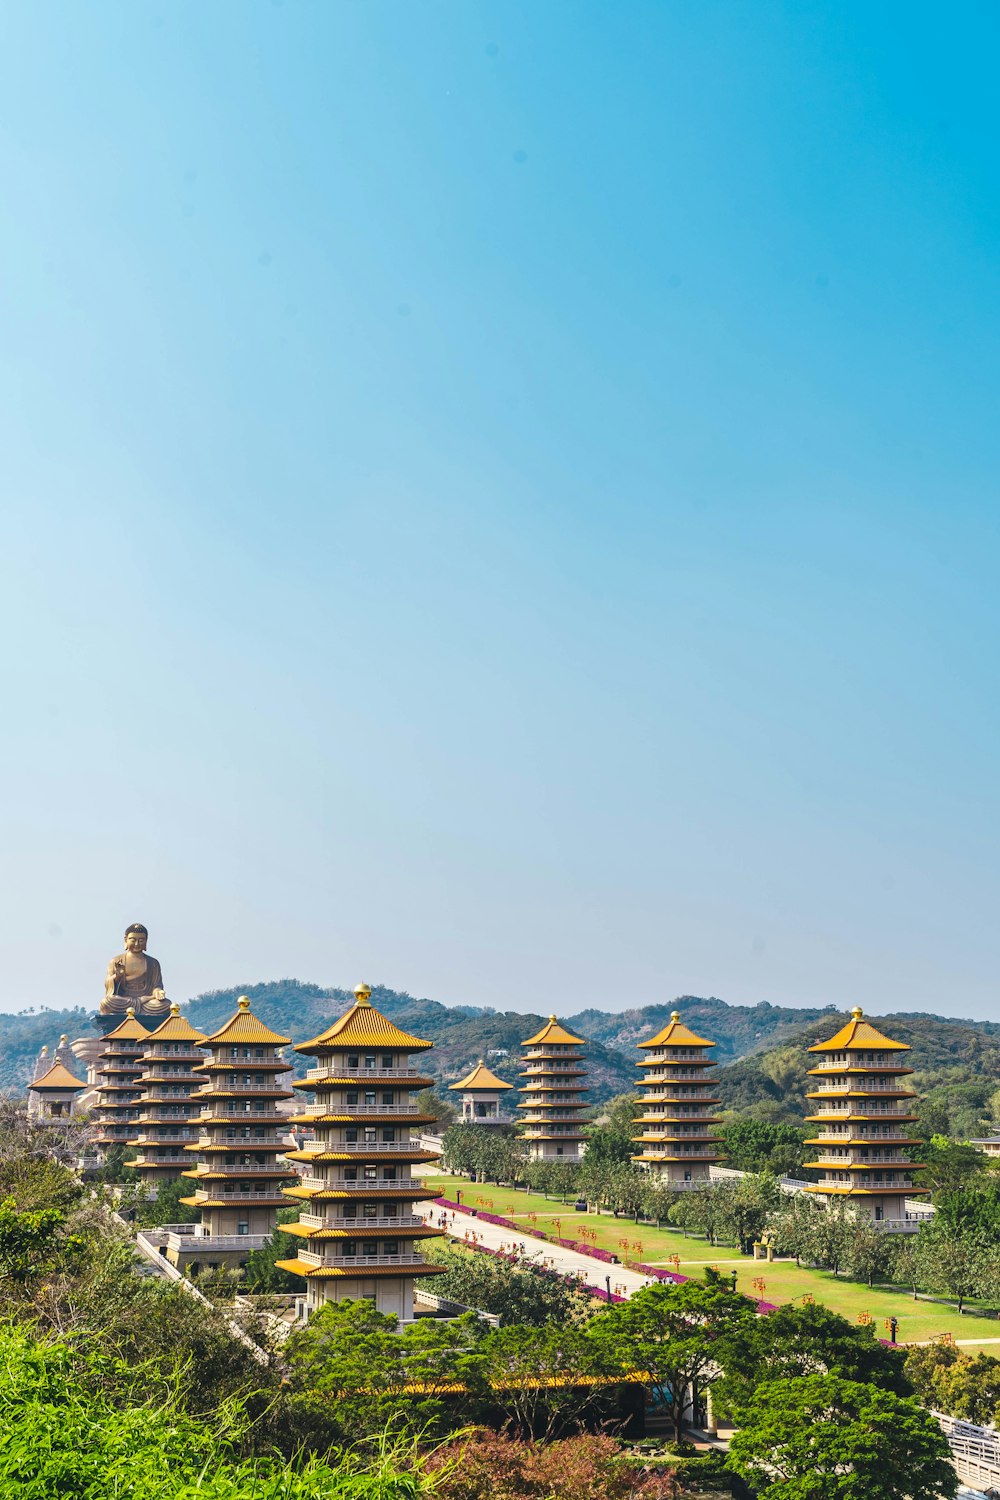 a row of pagodas on a hill with a blue sky in the background